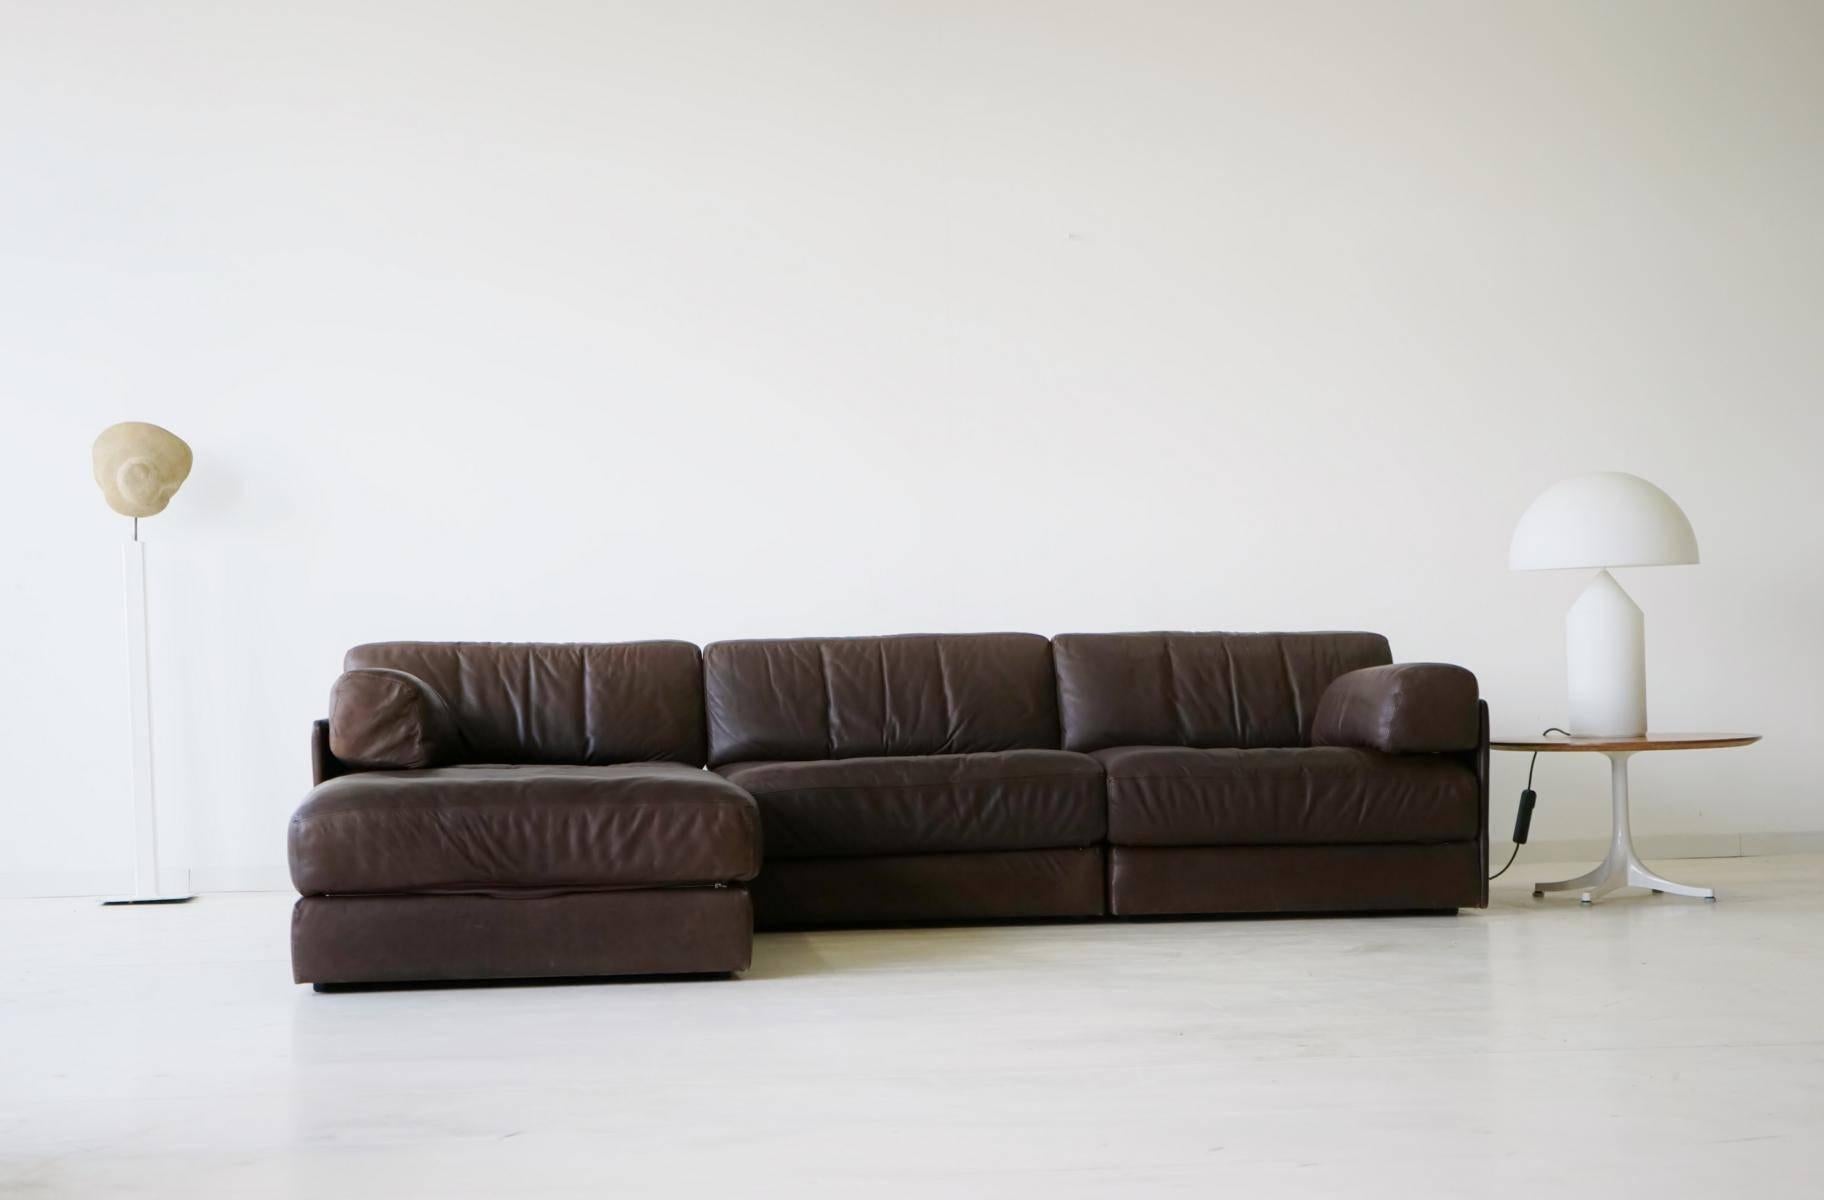 Mid-Century Modern Three-Seat and Ottoman, De Sede Ds 76 Leather Modular Lounge Sofa Daybed